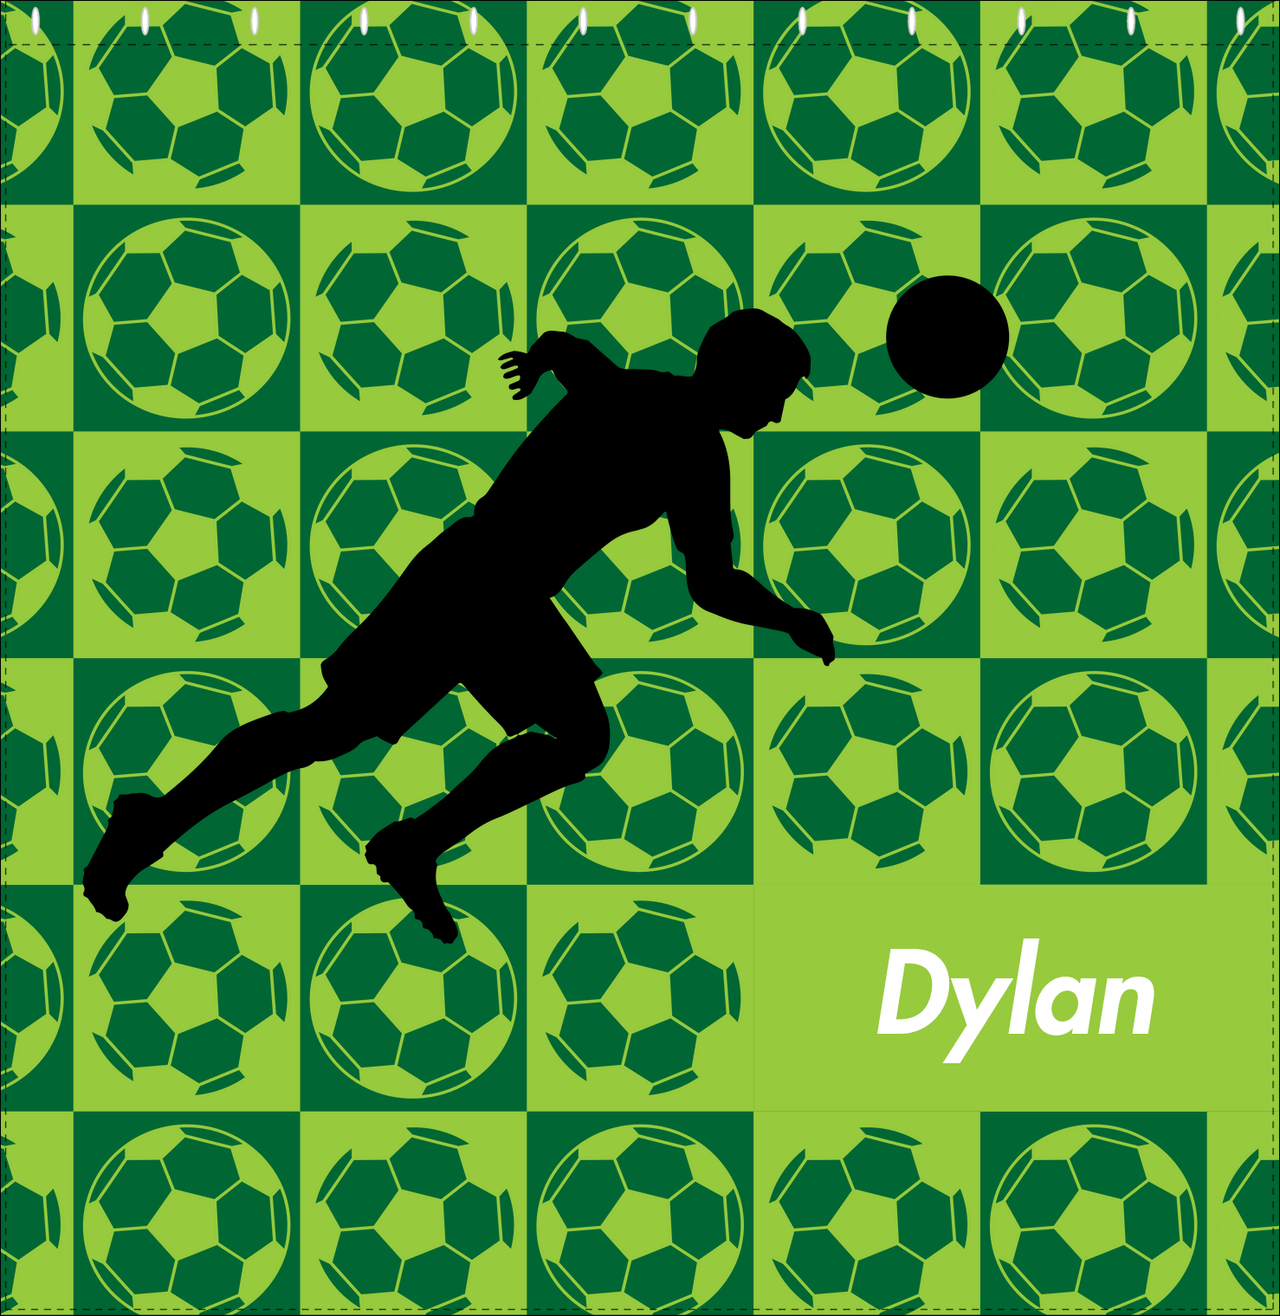 Personalized Soccer Shower Curtain XLVI - Green Background - Boy Silhouette V - Decorate View